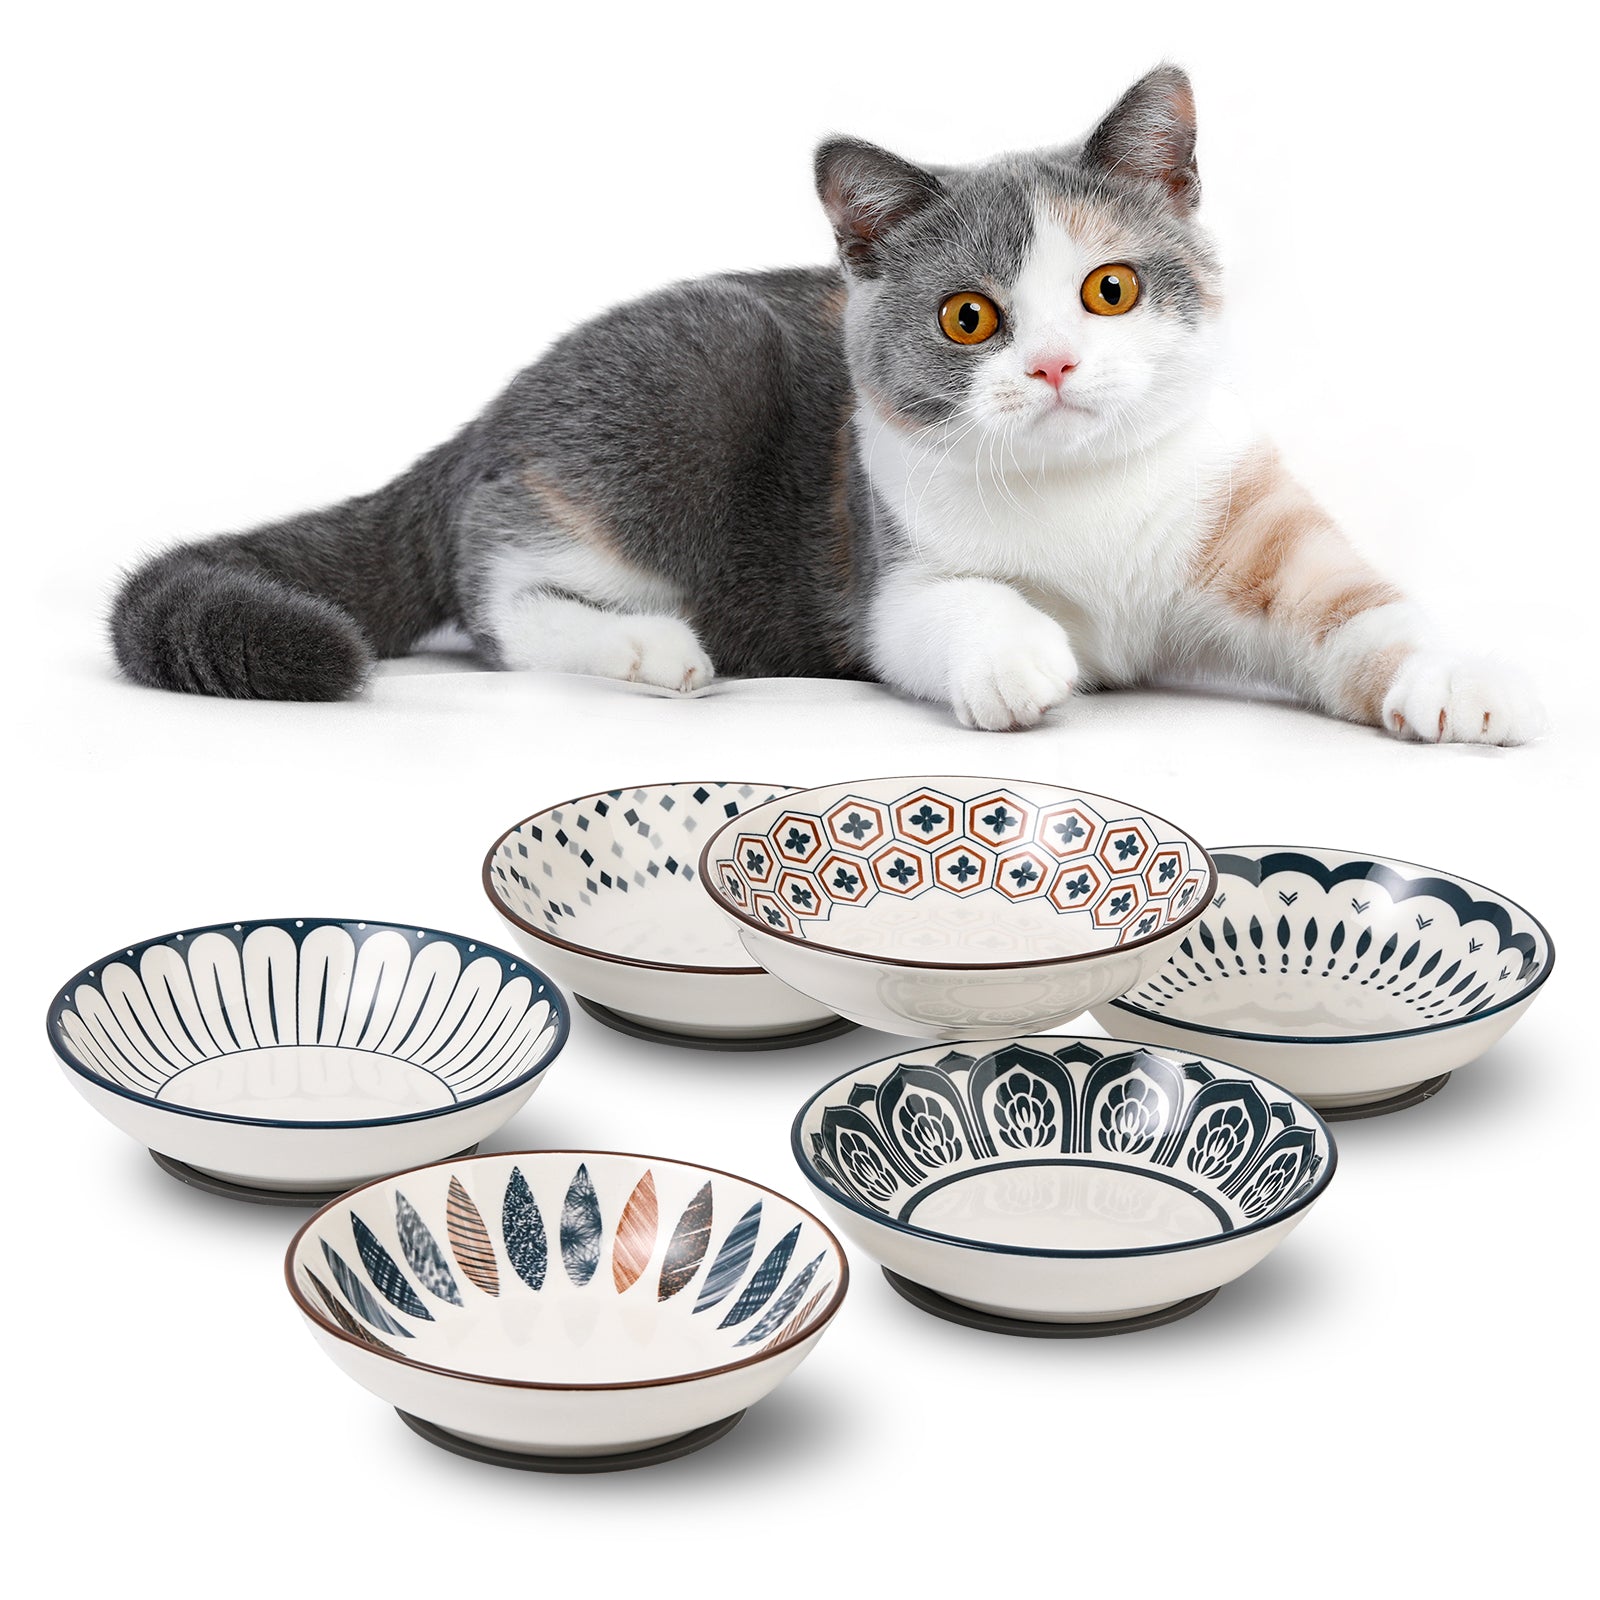 Small Ceramic Cat Food Bowl - Wide Shallow Cat Bowl with Non-Slip Mat - Whisker Friendly Cat Feeding Bowls - Japanese Style Cute Cat Dish - Cat Plates - Set of 6 - 8.5 oz - 5.75 inch